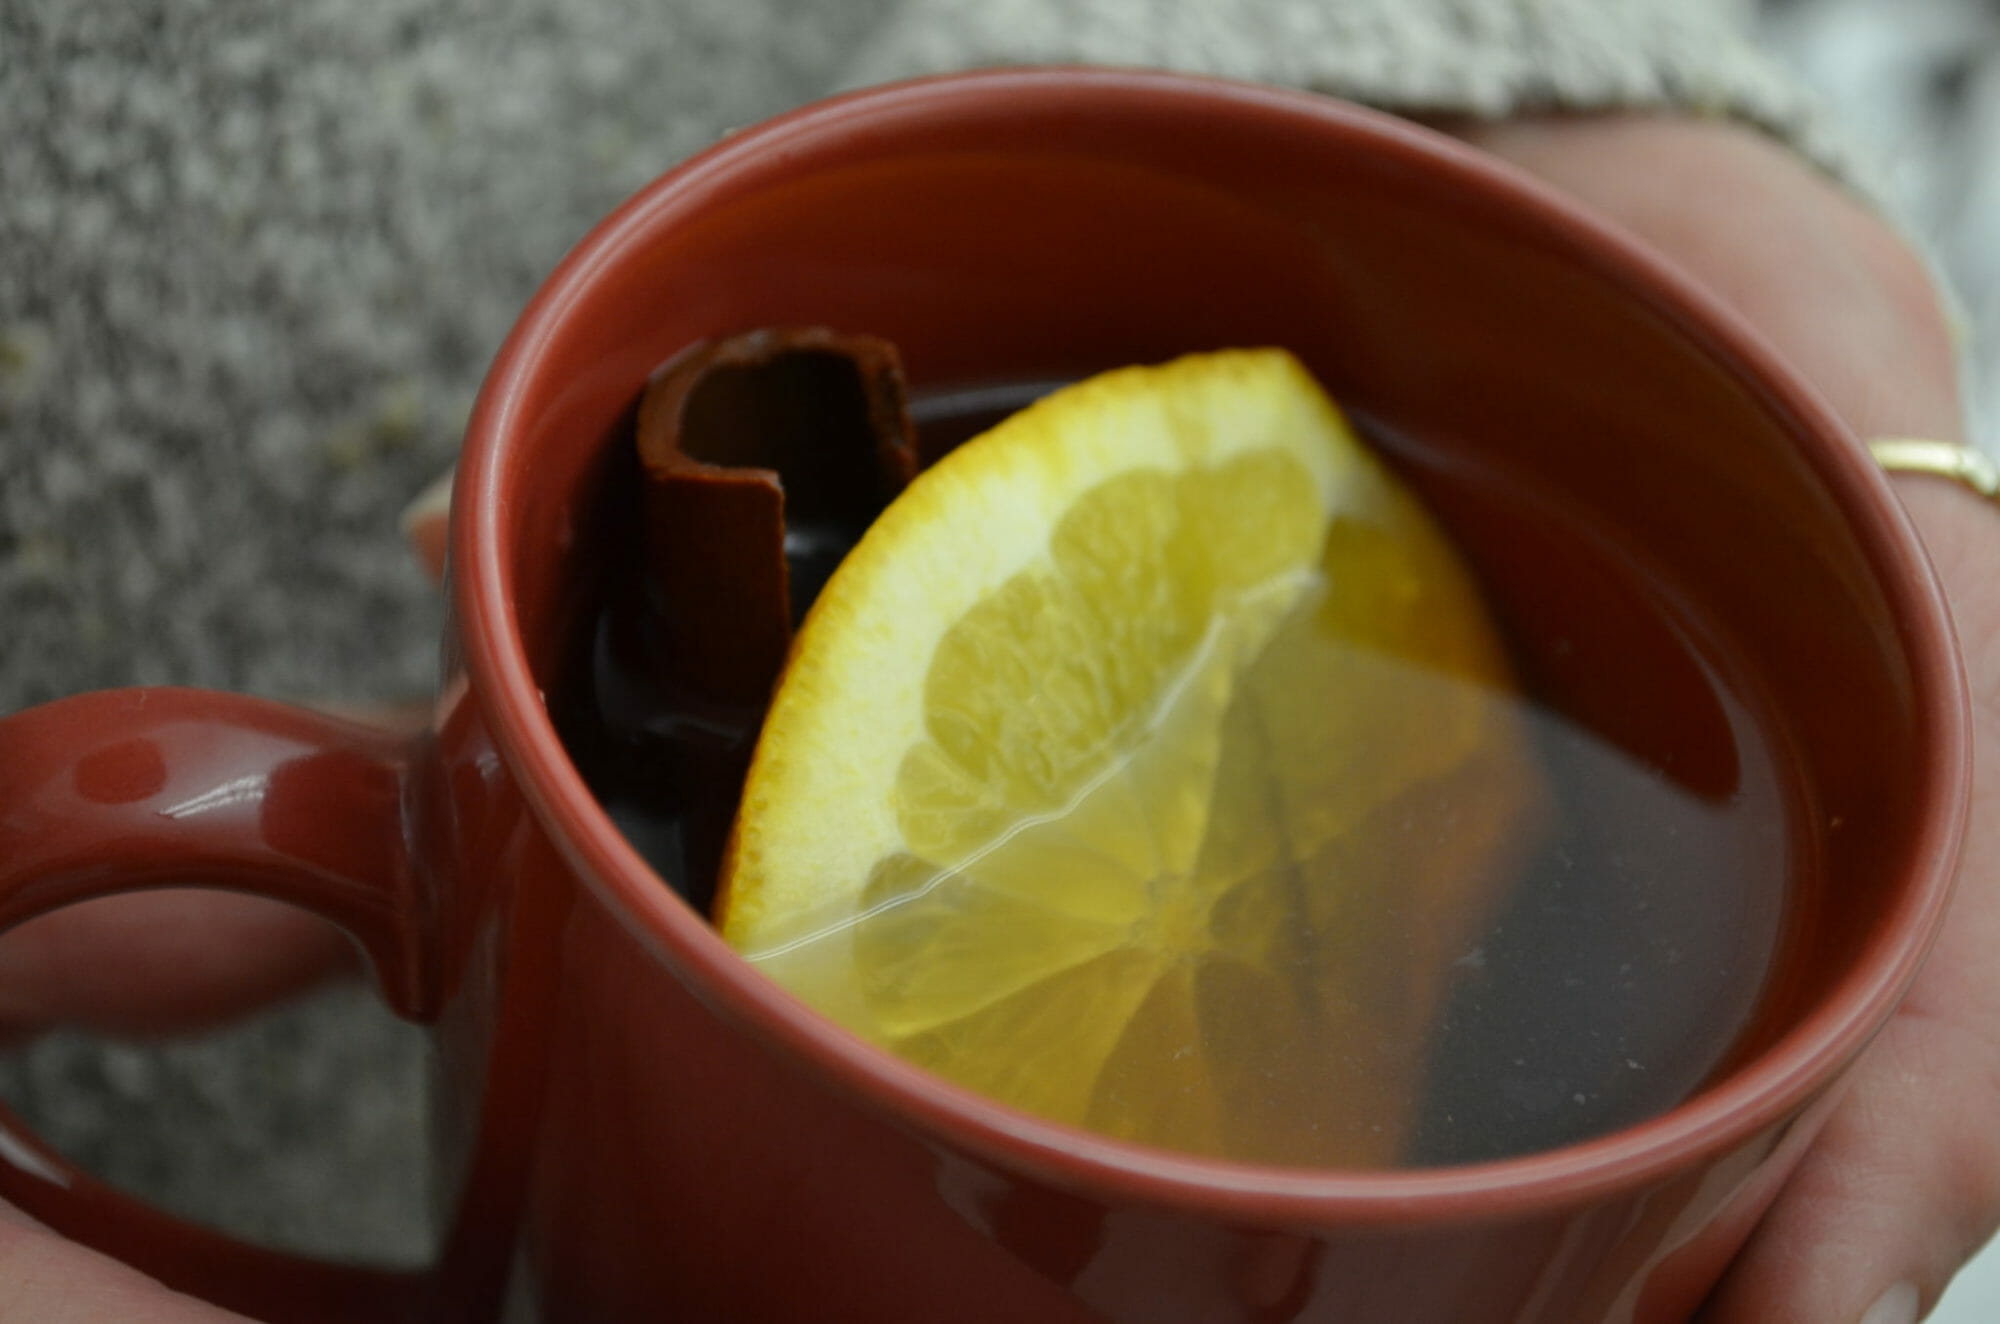 Close-up of a rust-colored mug filled with Mulled Apple Cider, a lemon wedge, and a cinnamon stick.